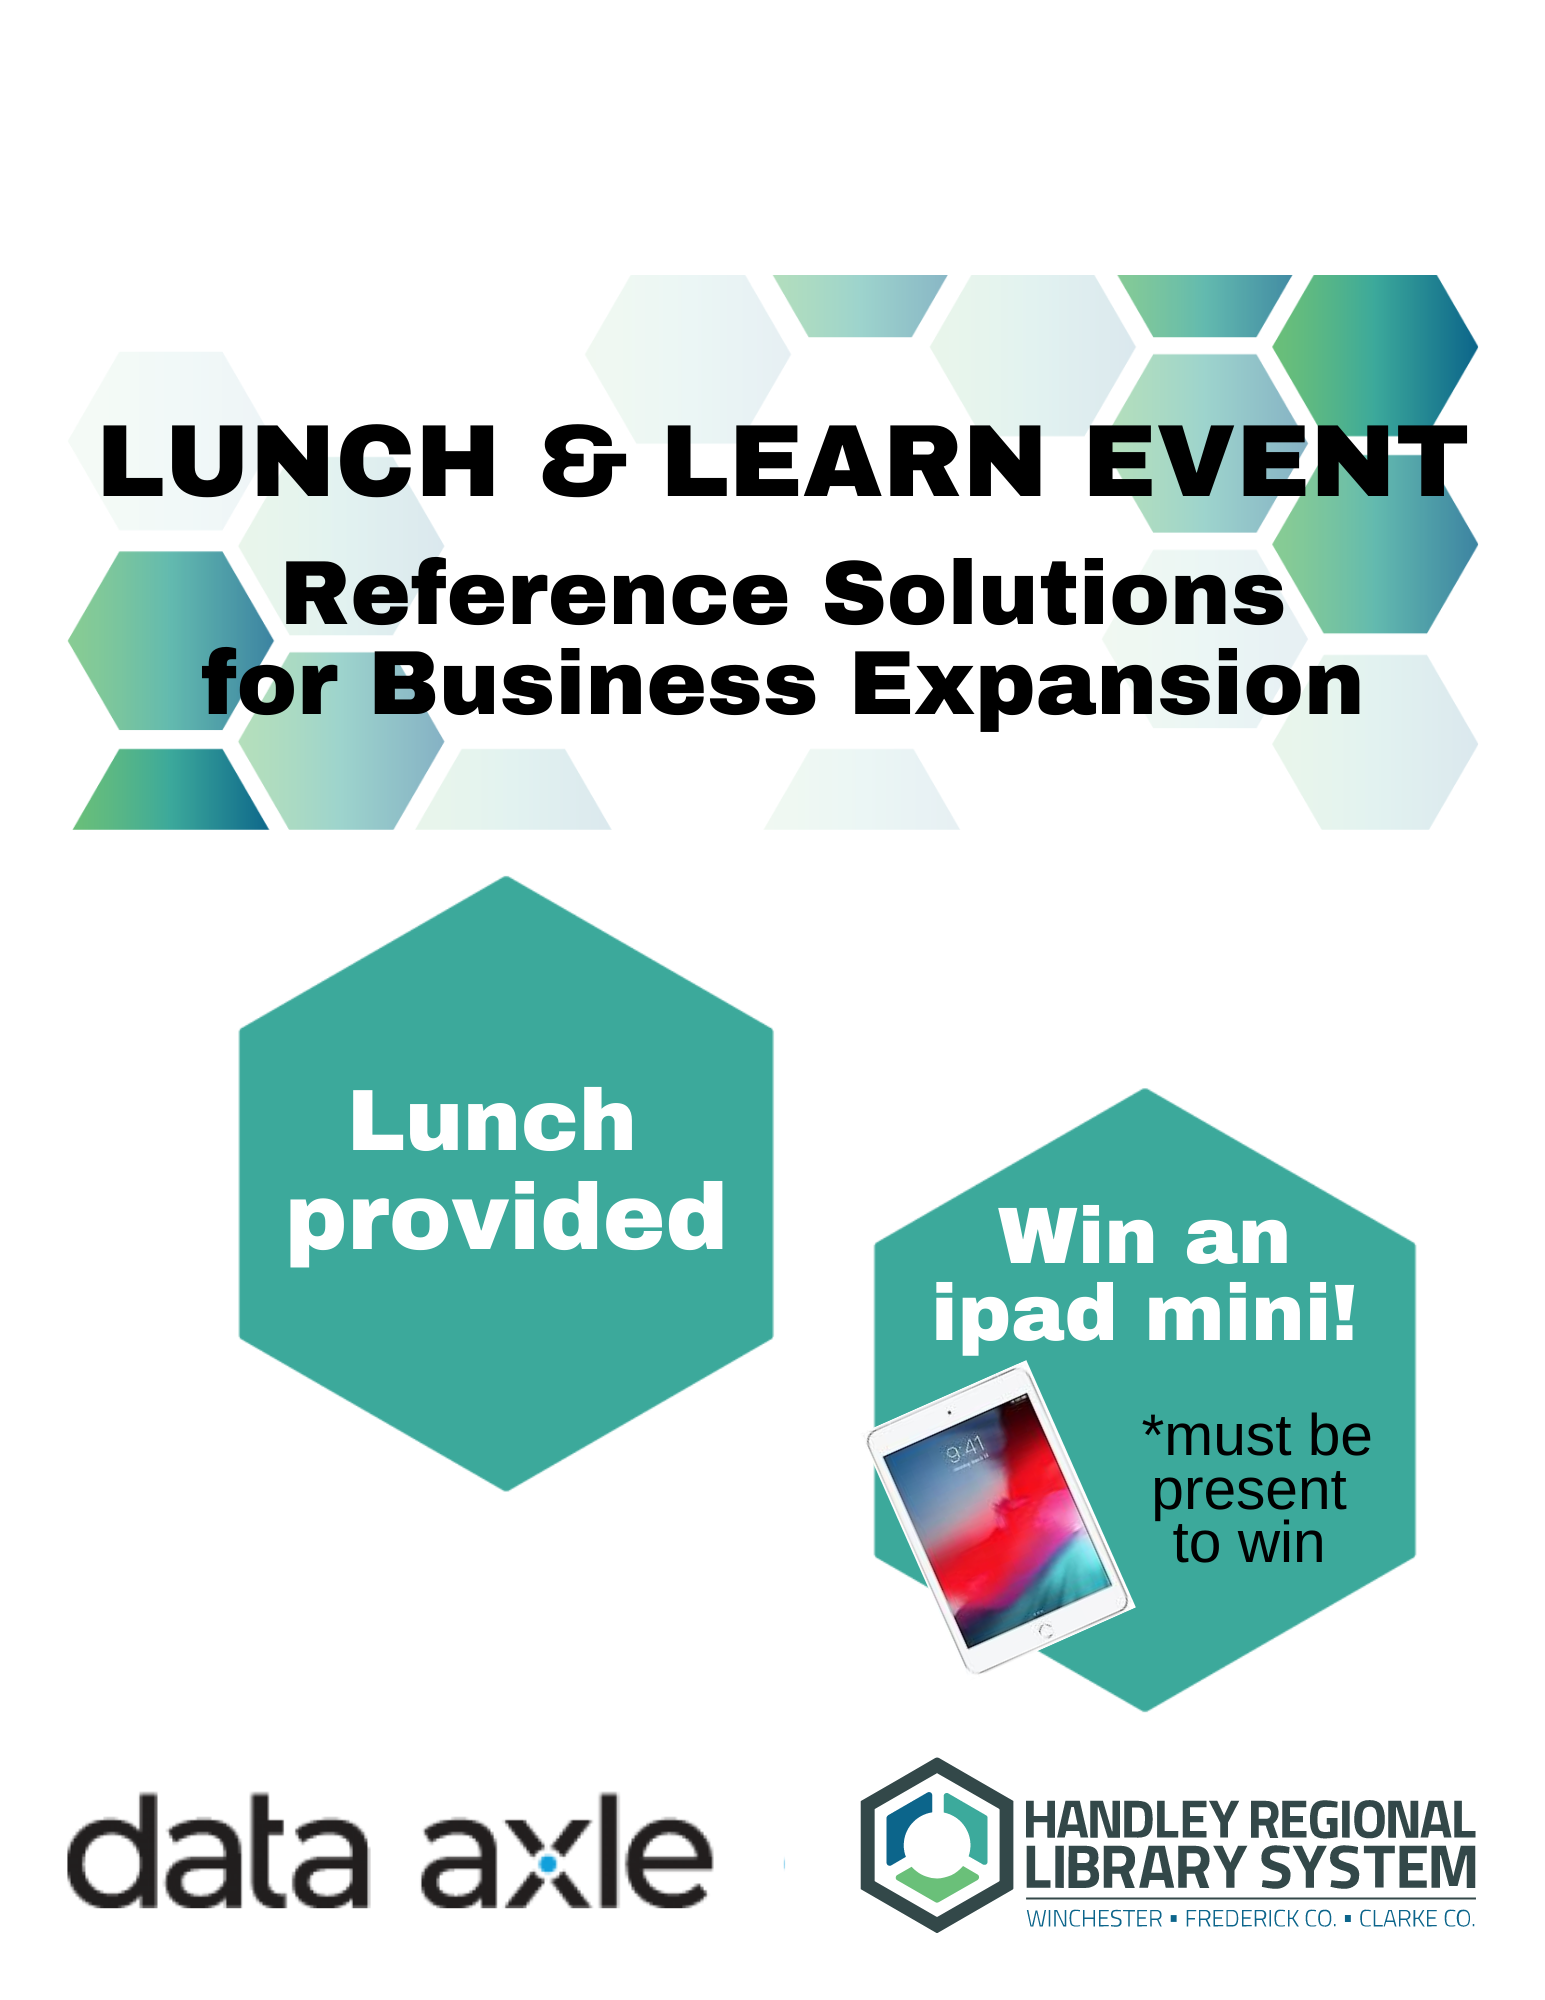 Reference Solutions for Business Expansion